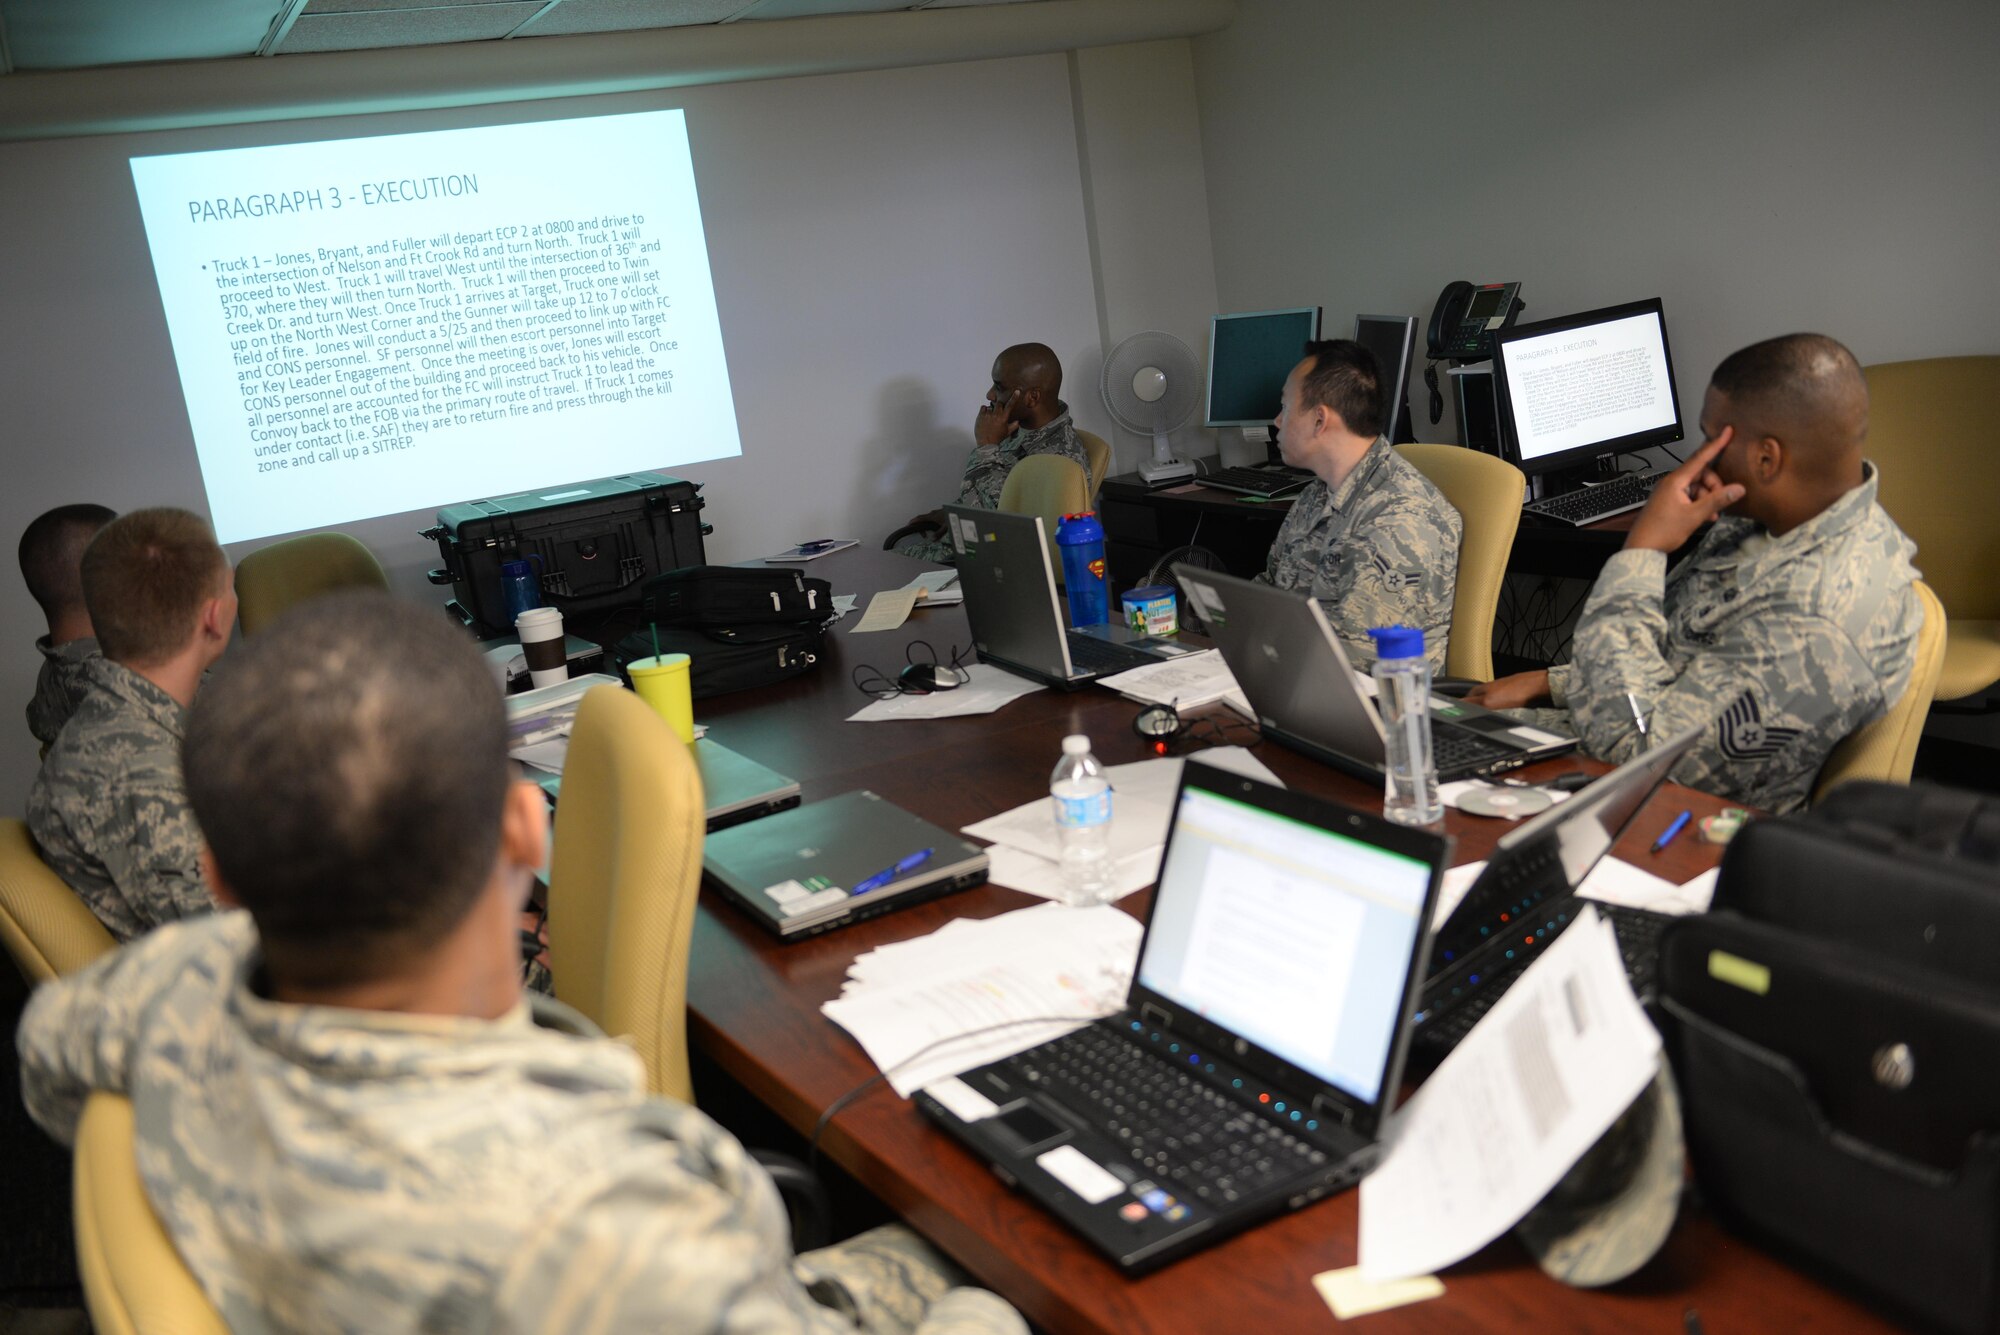 MSgt. James Arent, 55th Security Forces Squadron NCOIC of training, conducts convoy contingency training for Airmen assigned to the 55th Contracting Squadron at Offutt Air Force Base, Neb., May 10, 2017. Airmen participated in classroom instruction, with an in-depth discussion about what to expect in a deployed environment and how to properly handle different scenarios. (U.S. Air Force photo by Zachary Hada)